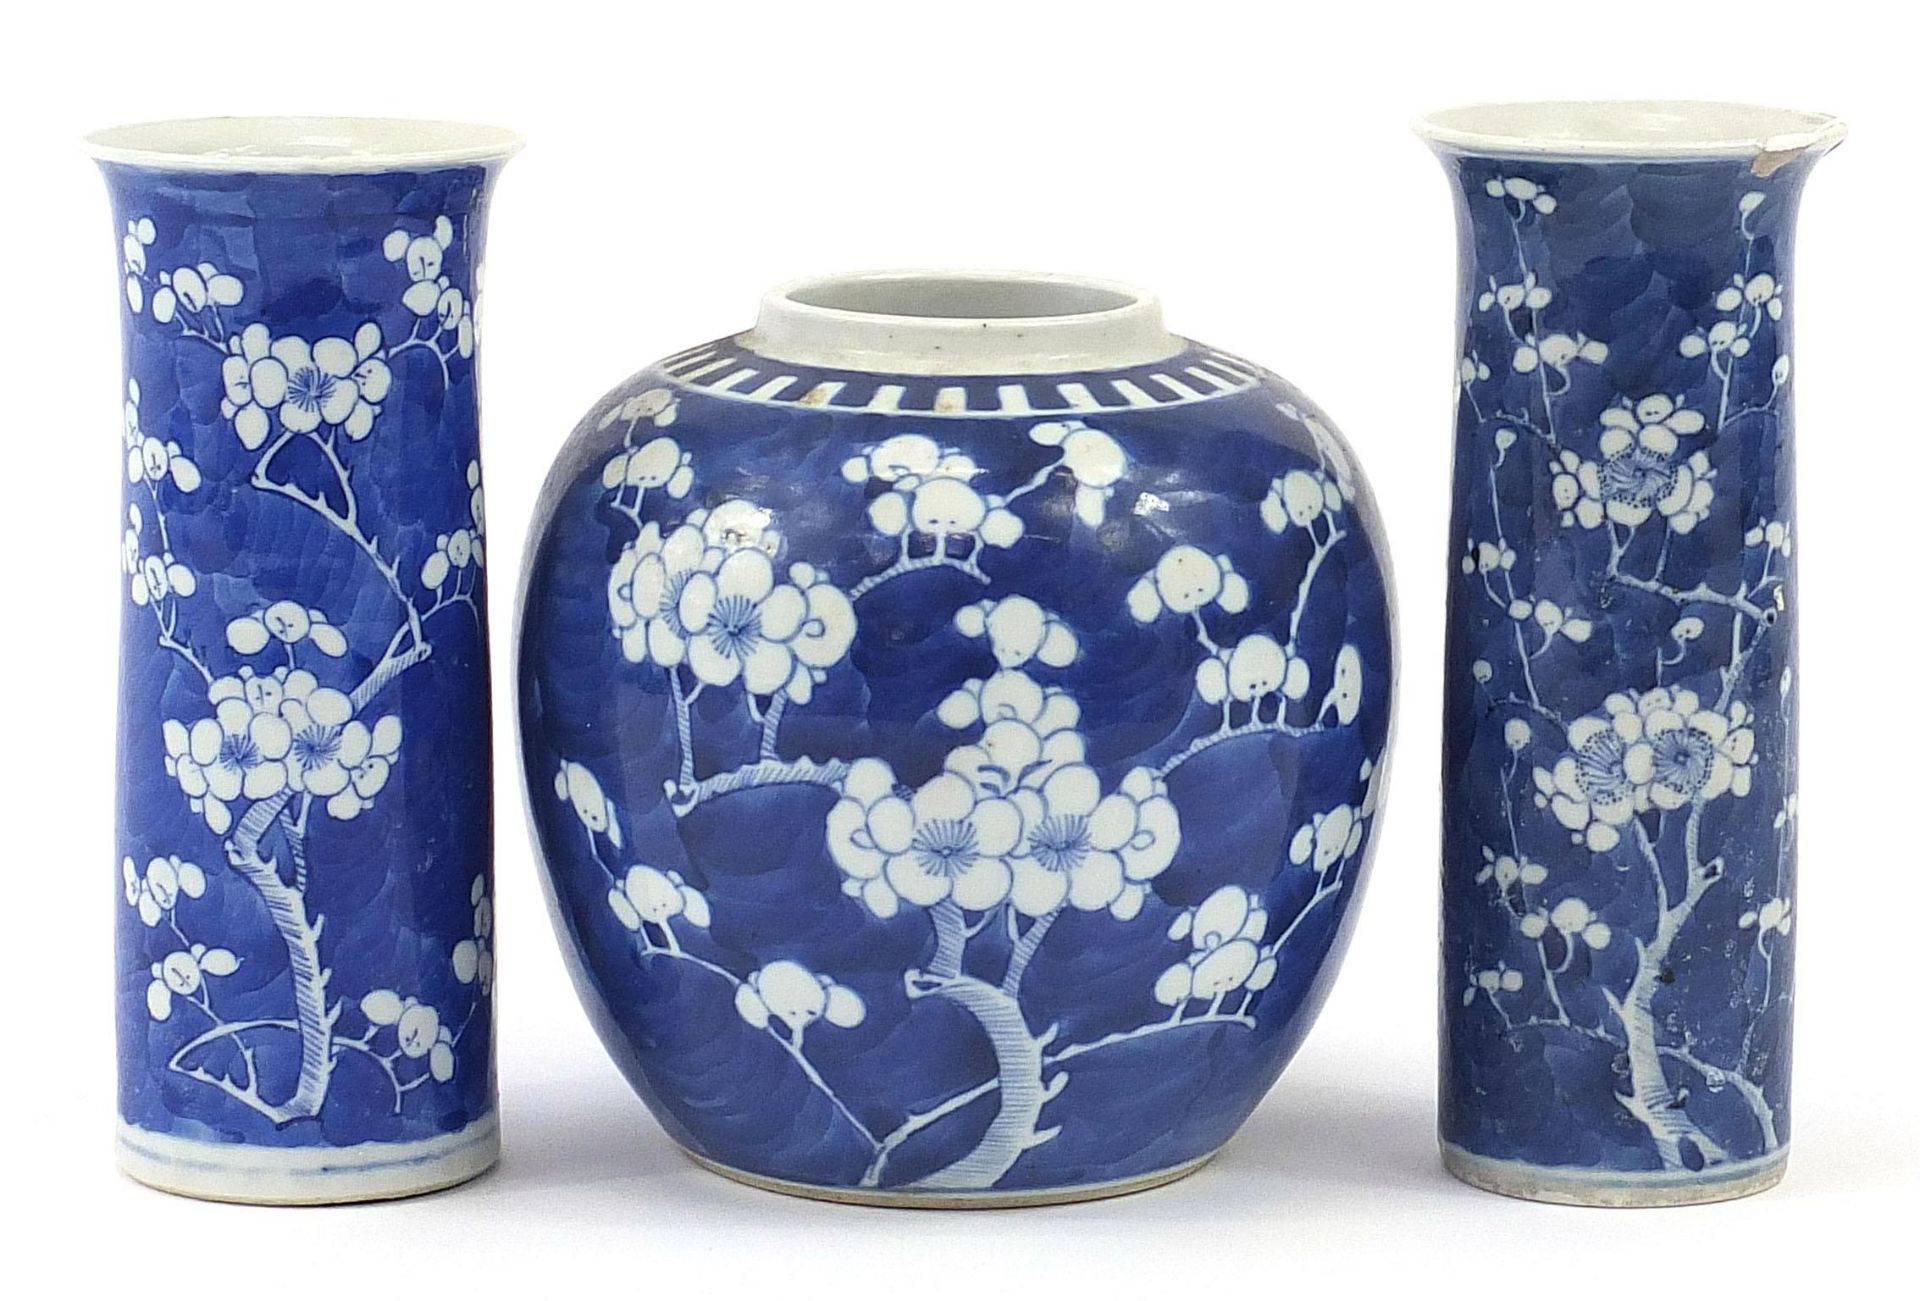 Chinese blue and white porcelain hand painted with prunus flowers comprising two cylindrical vases